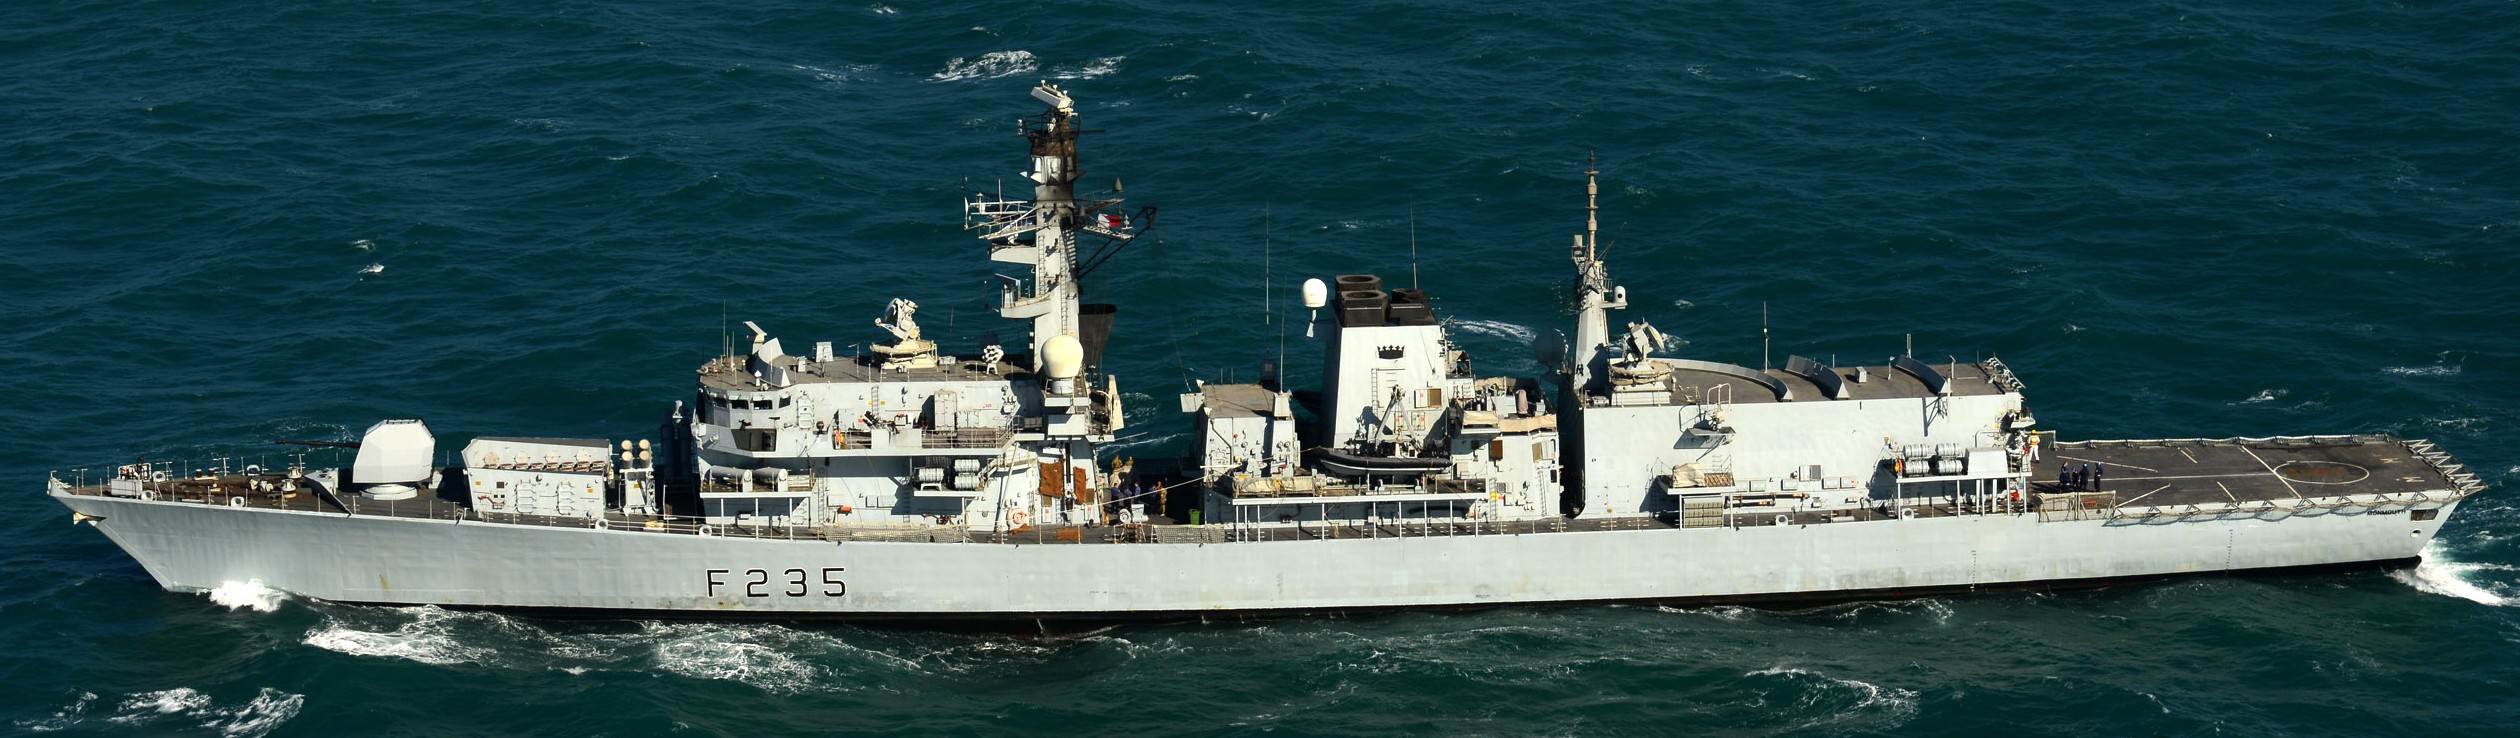 f-235 hms monmouth type 23 duke class guided missile frigate ffg royal navy 09